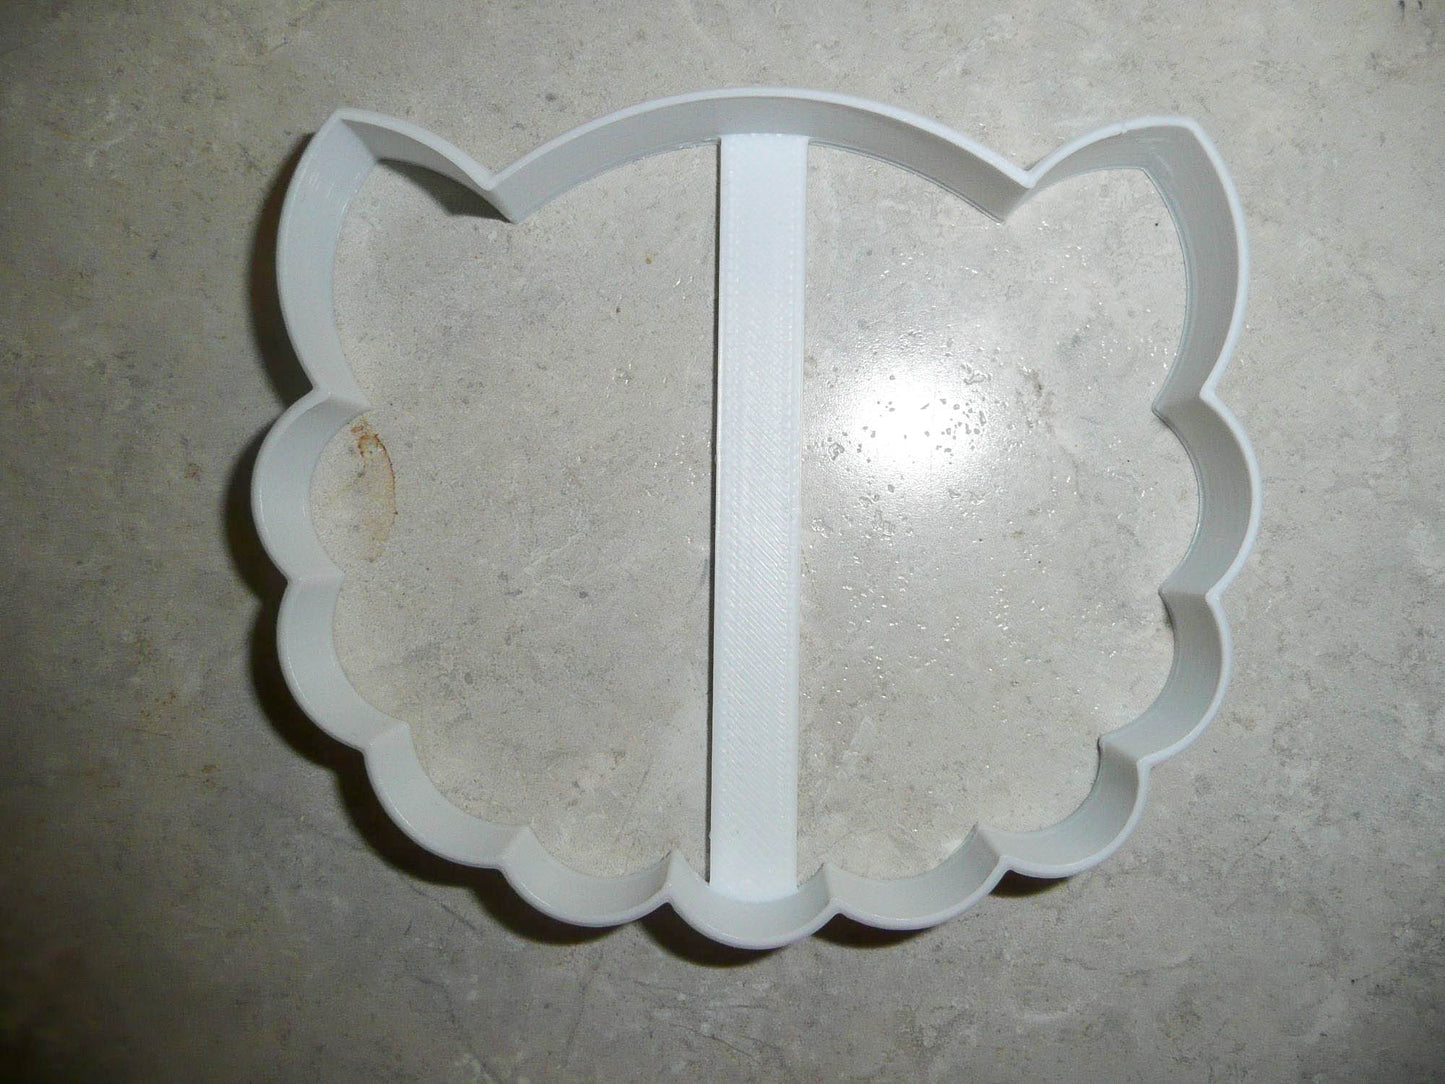 6x Baby Sheep Face Outline Fondant Cutter Cupcake Topper 1.75 Inch USA FD3115